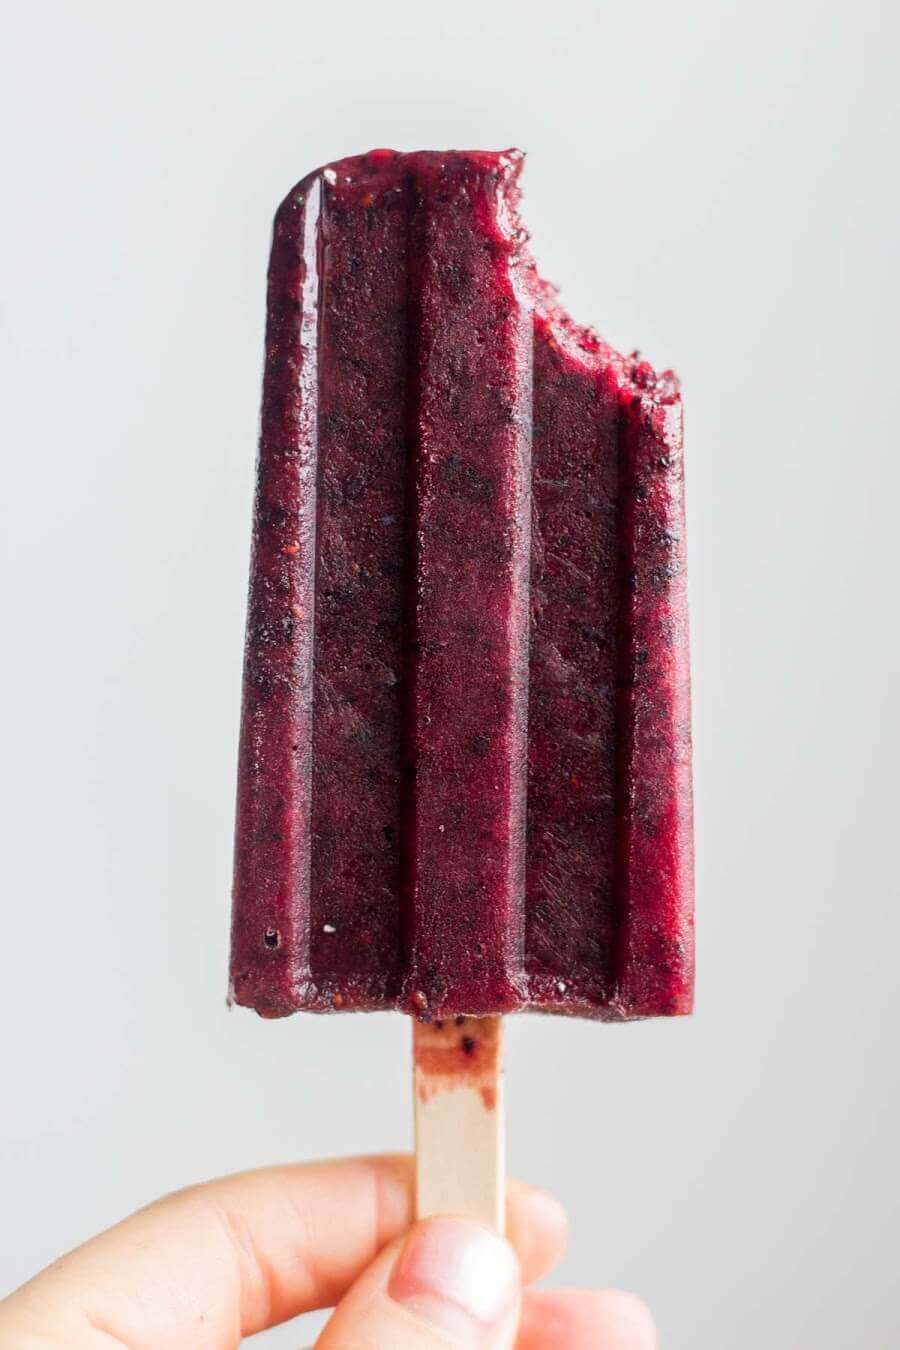 a hand holding up a homemade healthy blueberry popsicle with a bite taken out of the corner